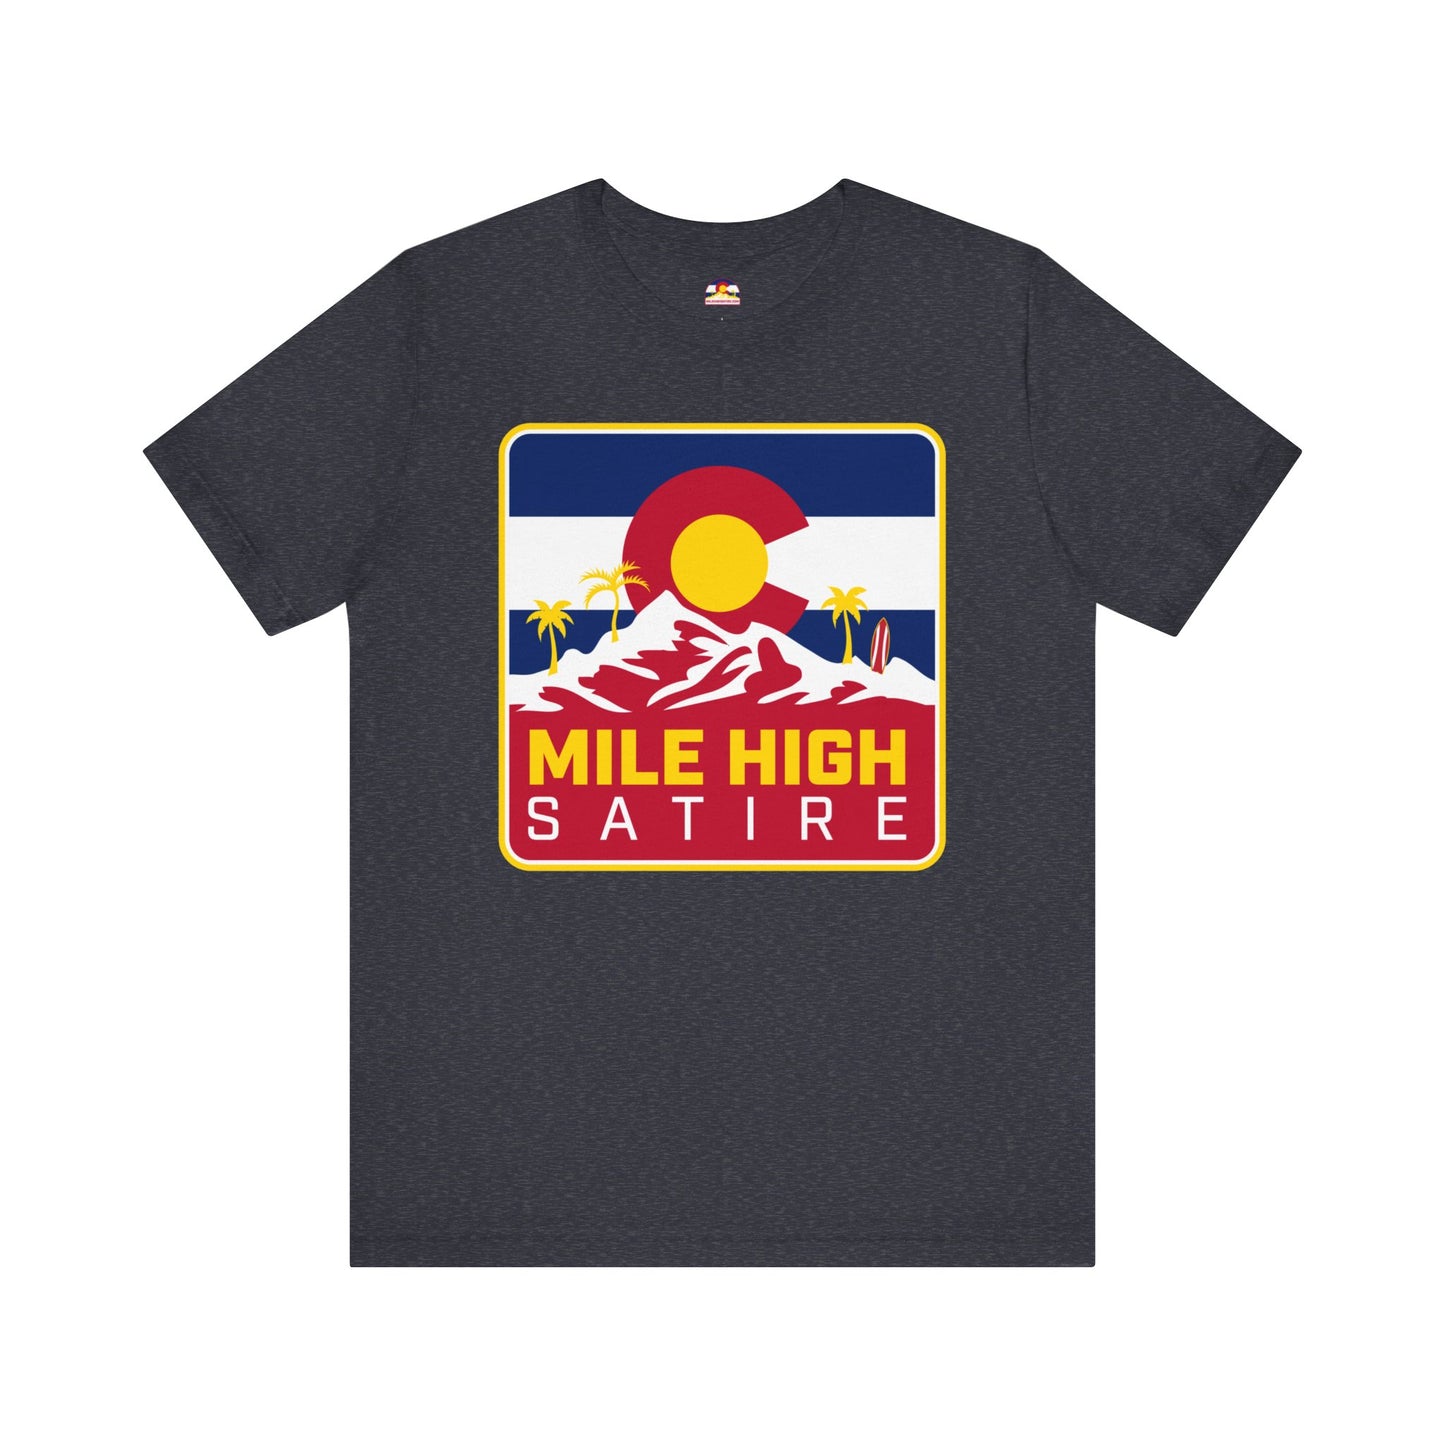 Mile High Satire T-Shirt - Red Square Logo